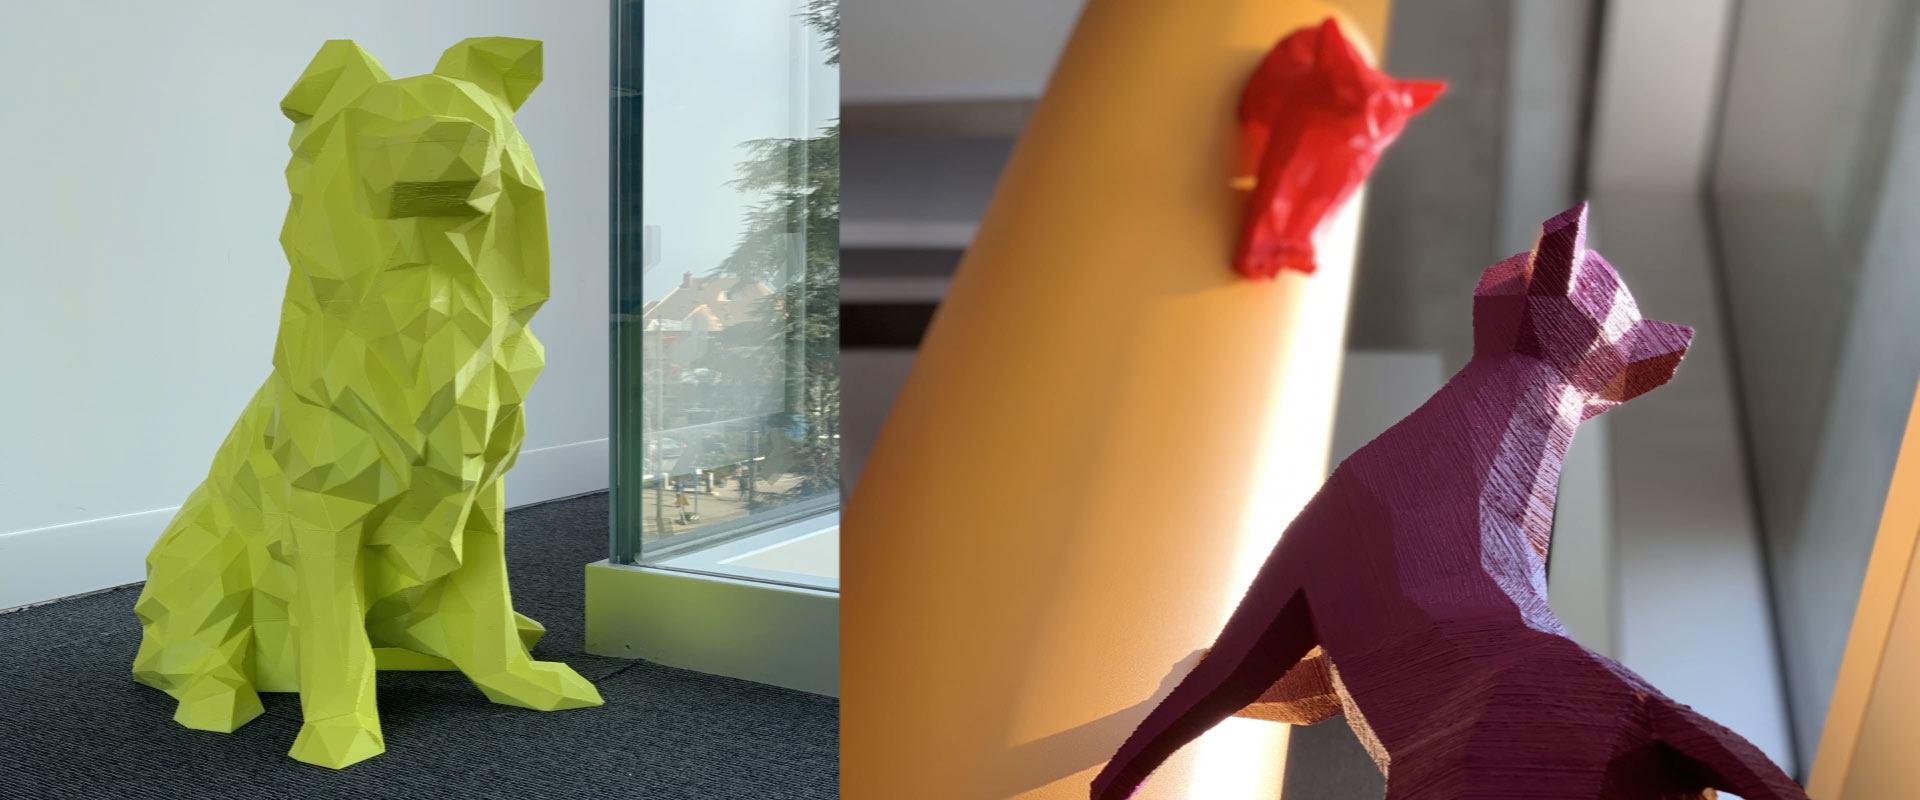 Dogs and cats in 3D in Purina offices in Vevey